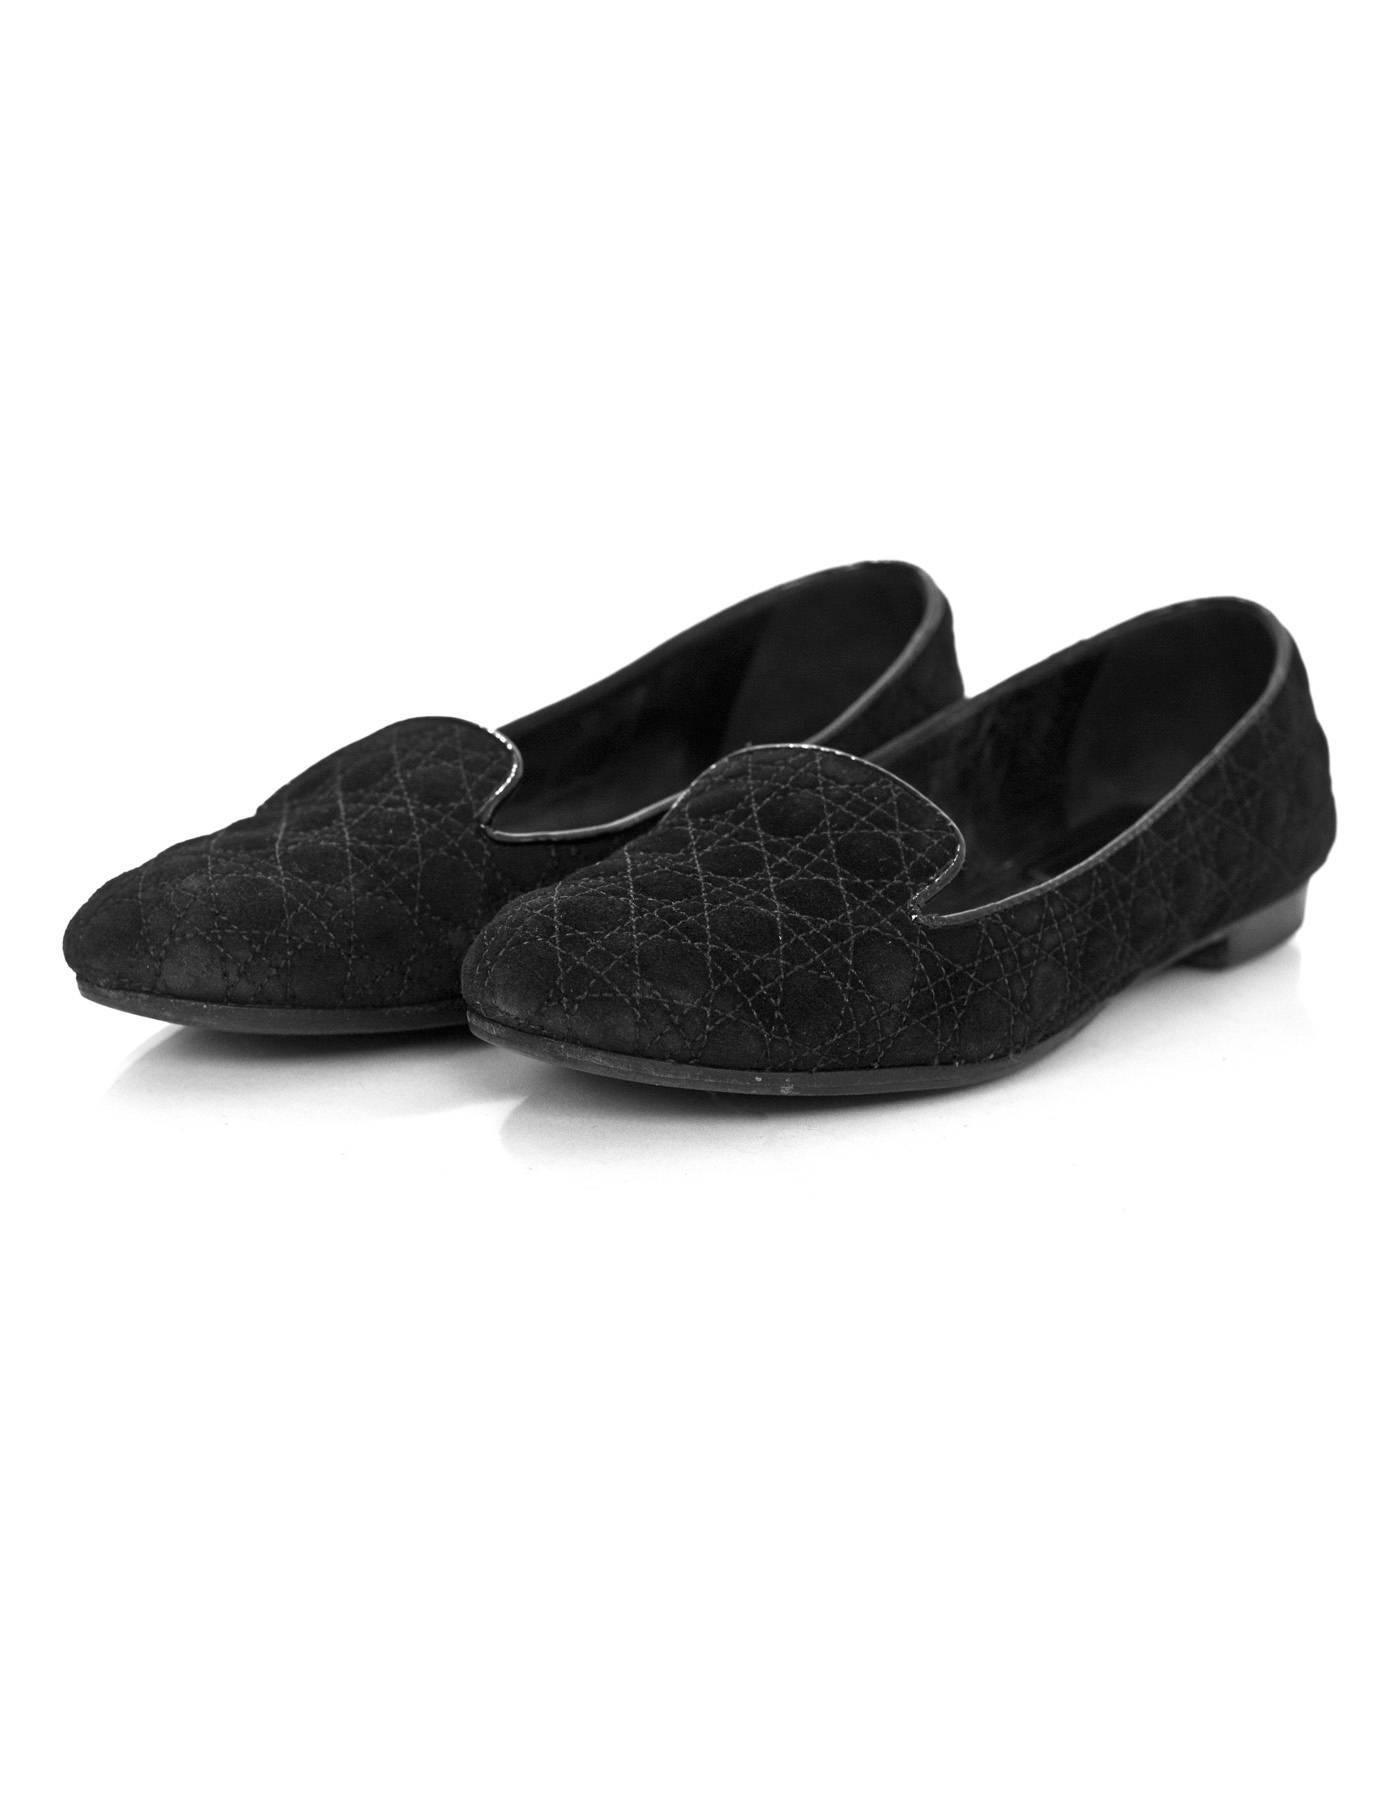 Christian Dior Black Suede Quilted Loafers Sz 35

Made In: Italy
Color: Black
Materials: Suede
Closure/Opening: Slide on
Sole Stamp: Dior made in italy 35
Retail Price: $610 + tax
Overall Condition: Very good pre-owned condition with the exception